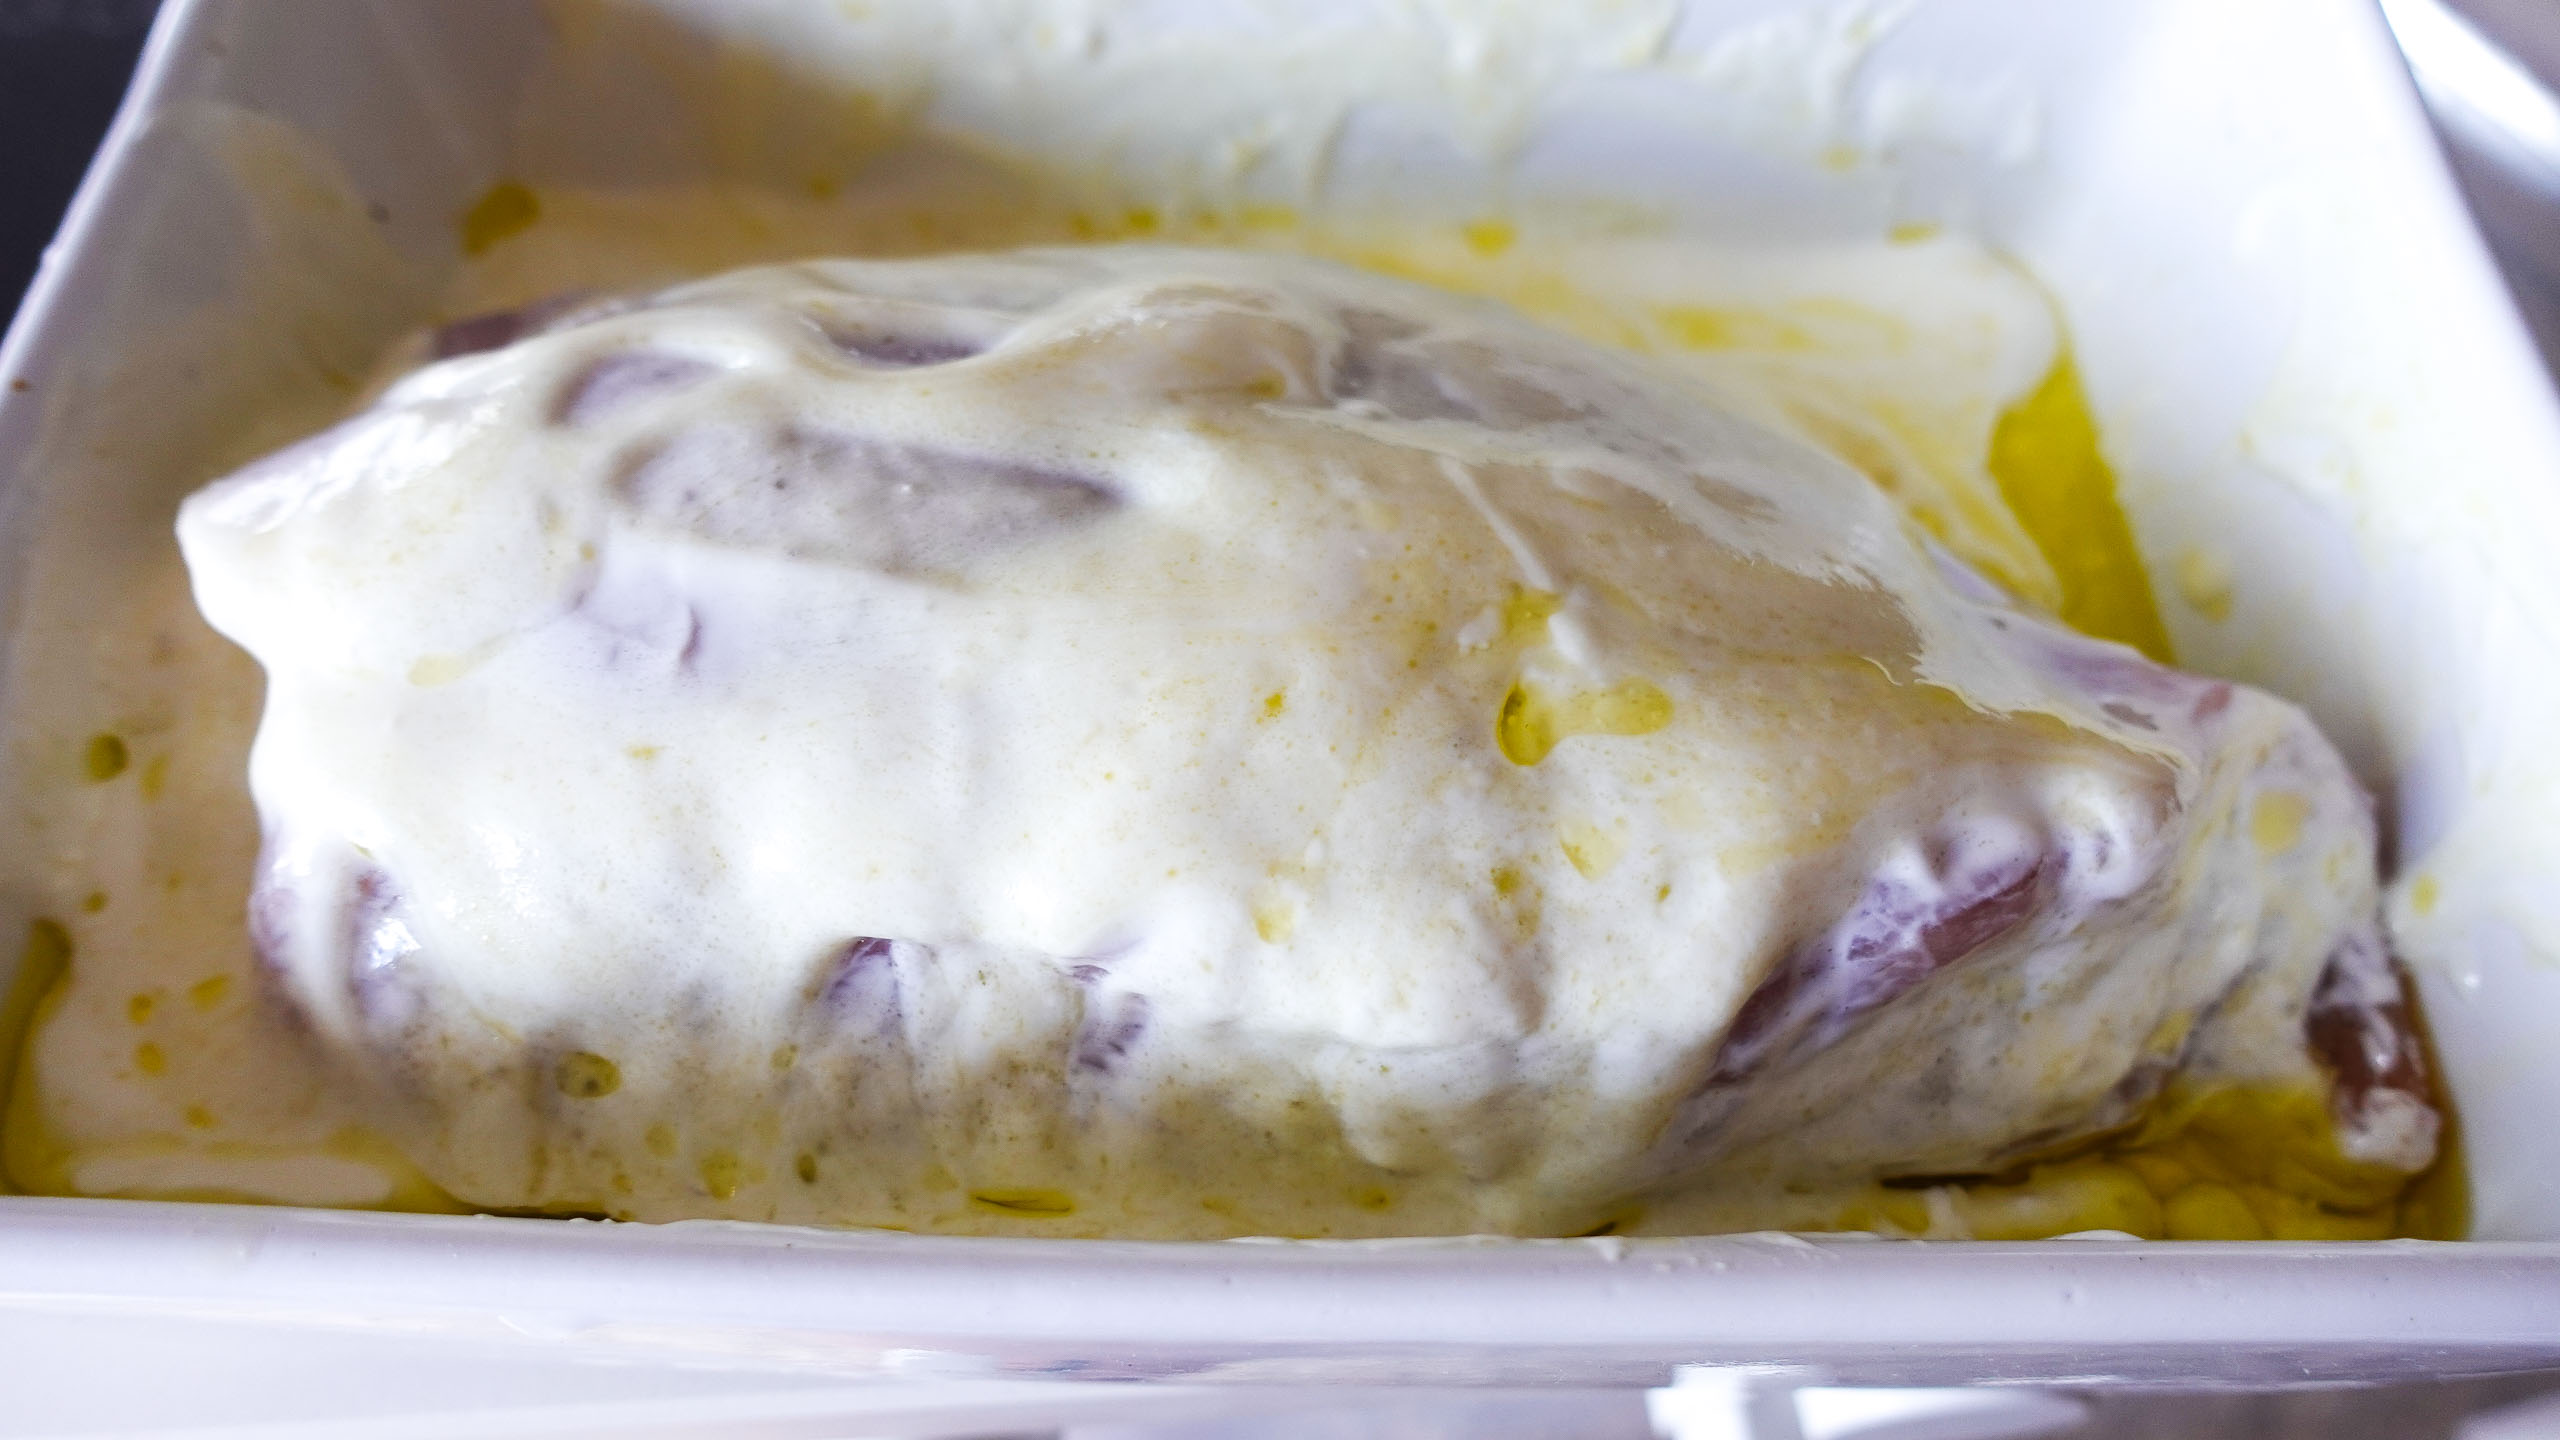 Coated turkey breast with sour cream and honey